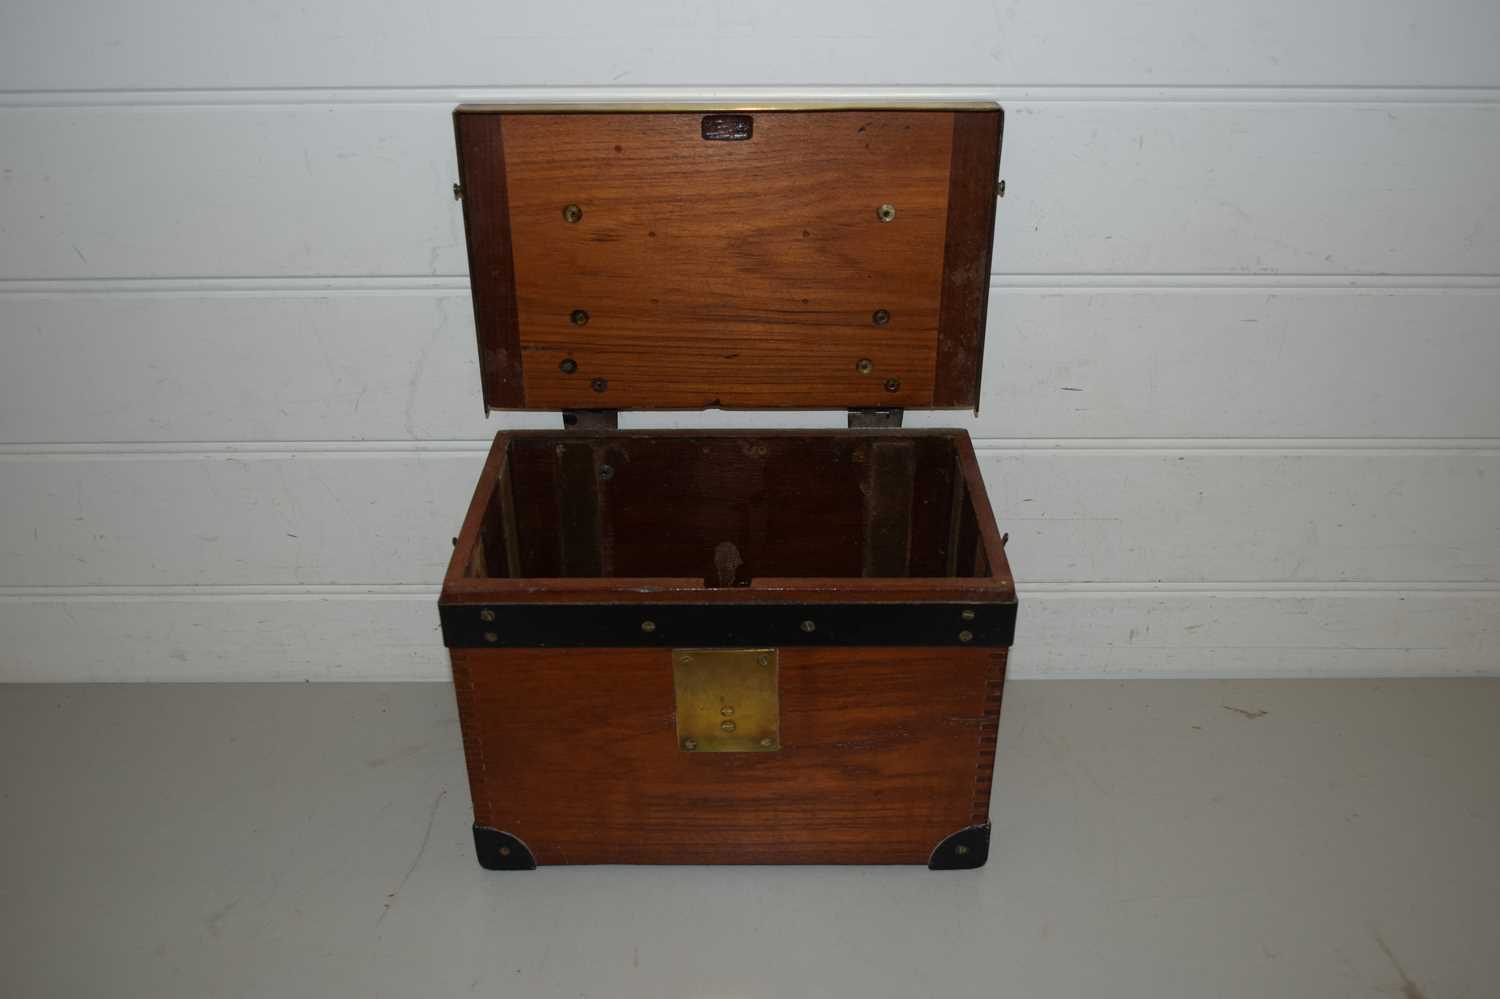 SMALL HARDWOOD METAL BOUND BOX, POSSIBLY A SCIENTIFIC INSTRUMENT CASE